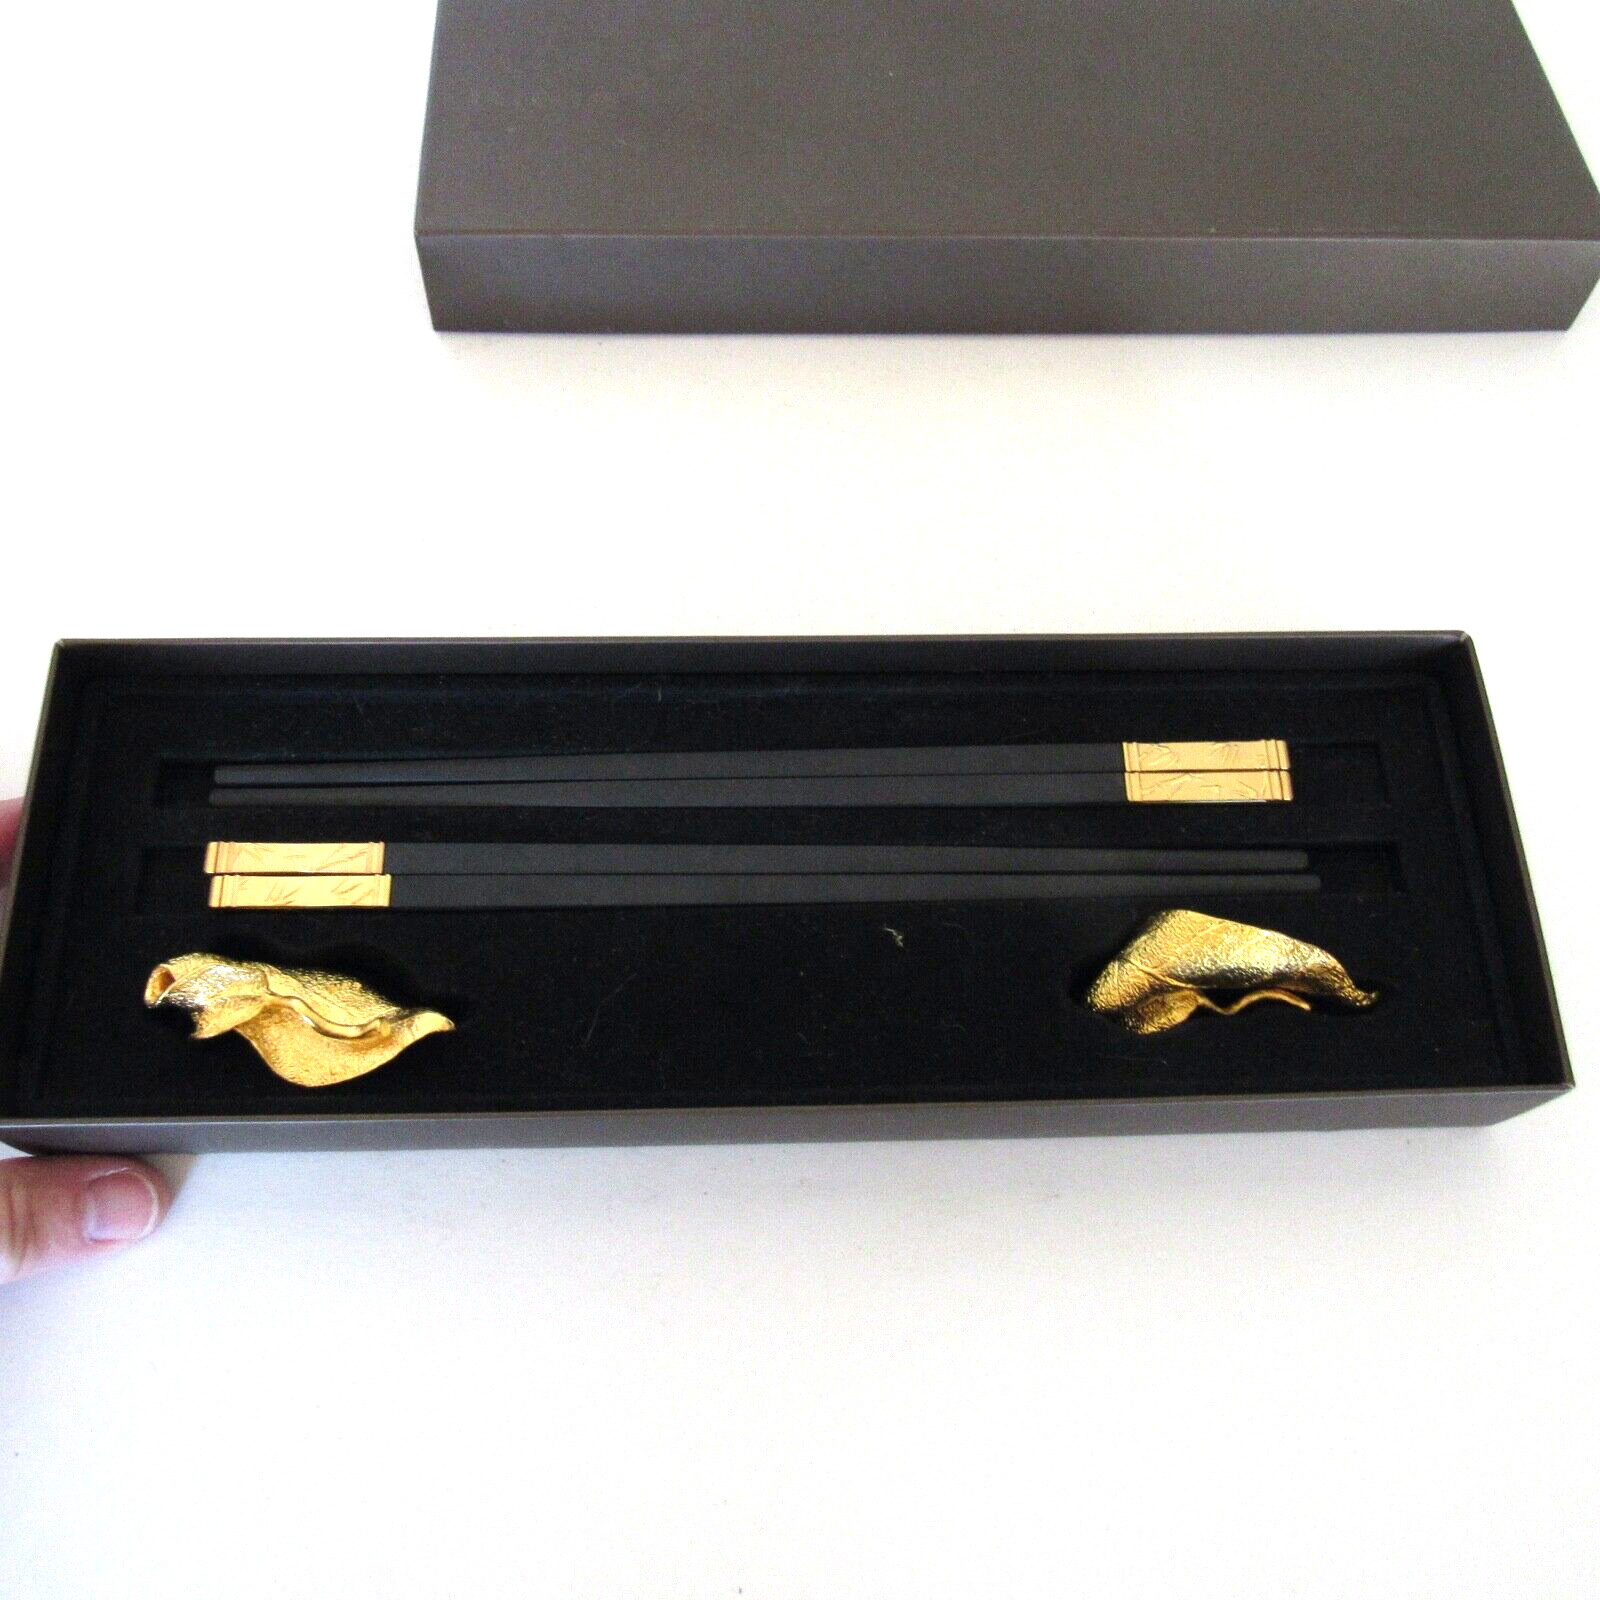 Risis Chopsticks Gold Tipped Black Bamboo Unused In Box 24kt Gold Plated